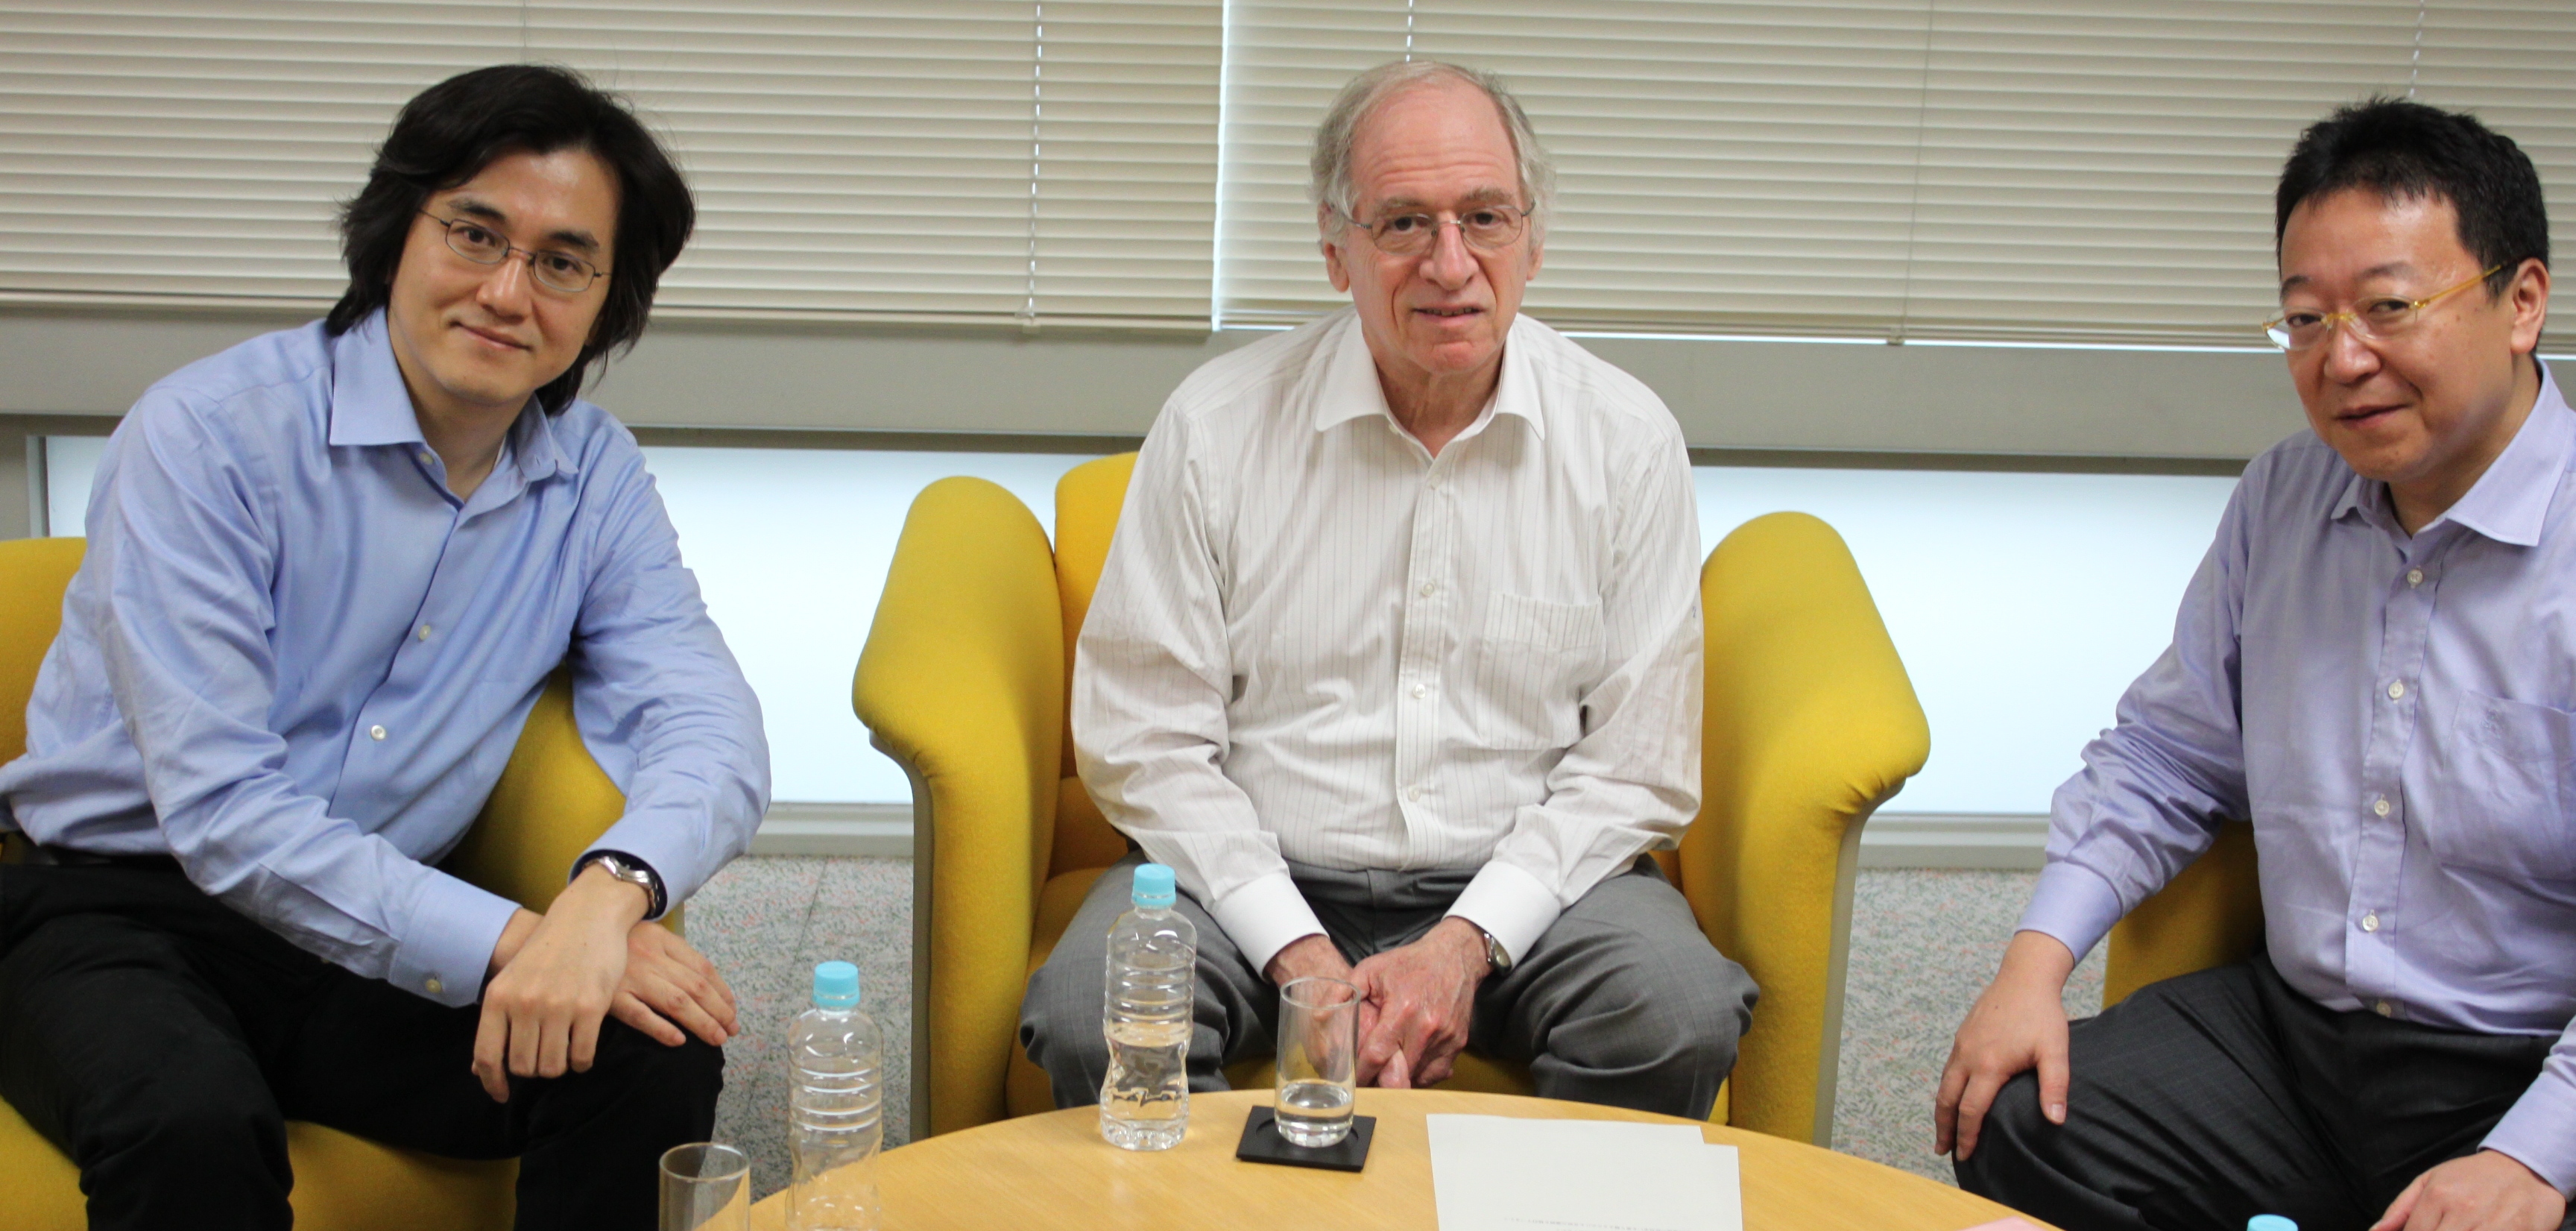 From left, Sota Kato, Gerald Curtis, and Tsuneo Watanabe.